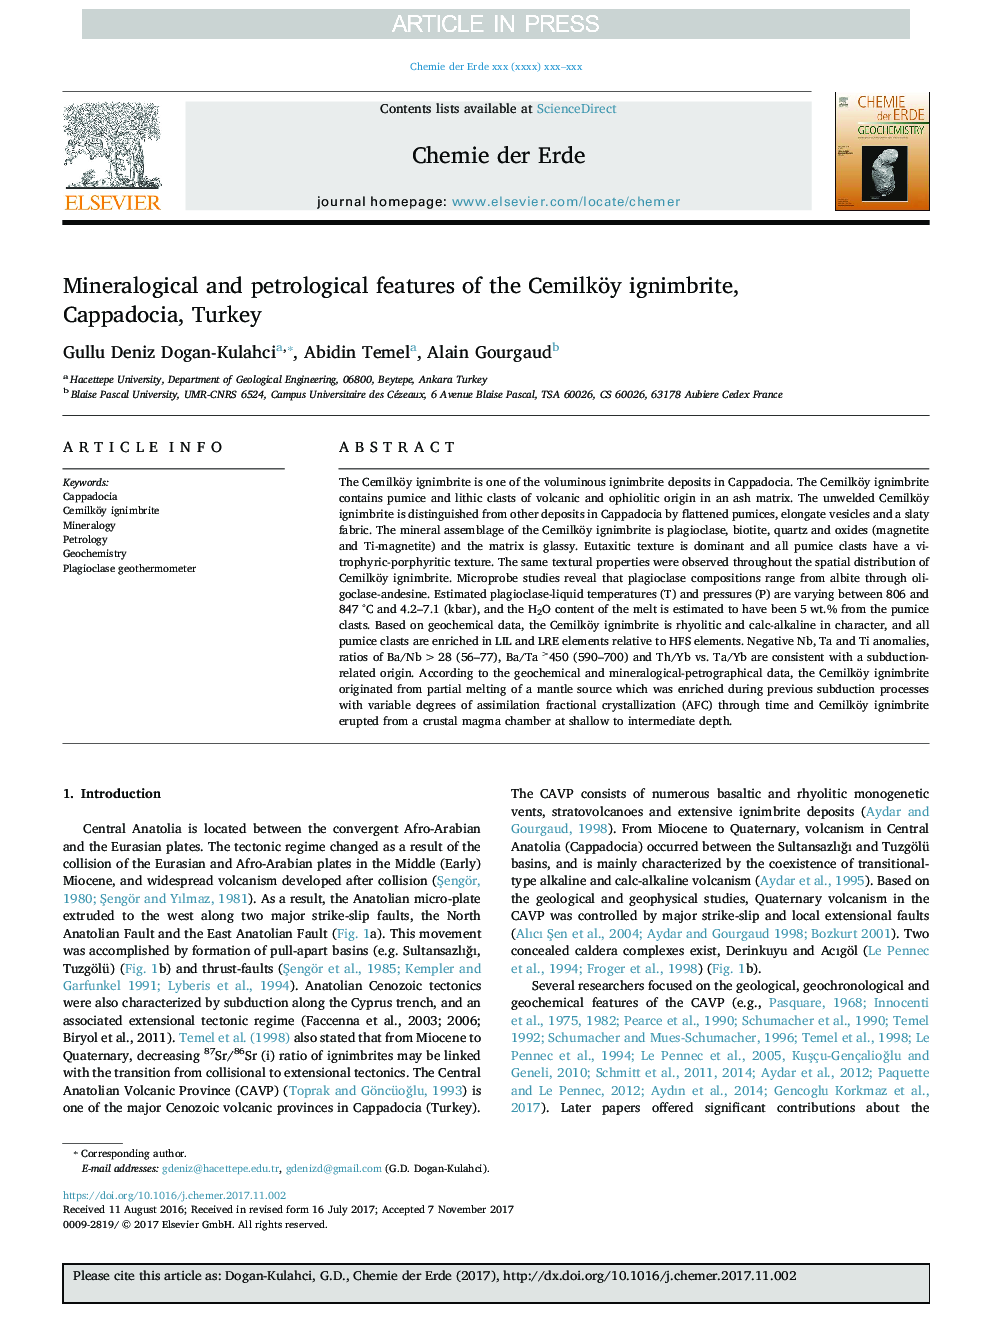 Mineralogical and petrological features of the Cemilköy ignimbrite, Cappadocia, Turkey